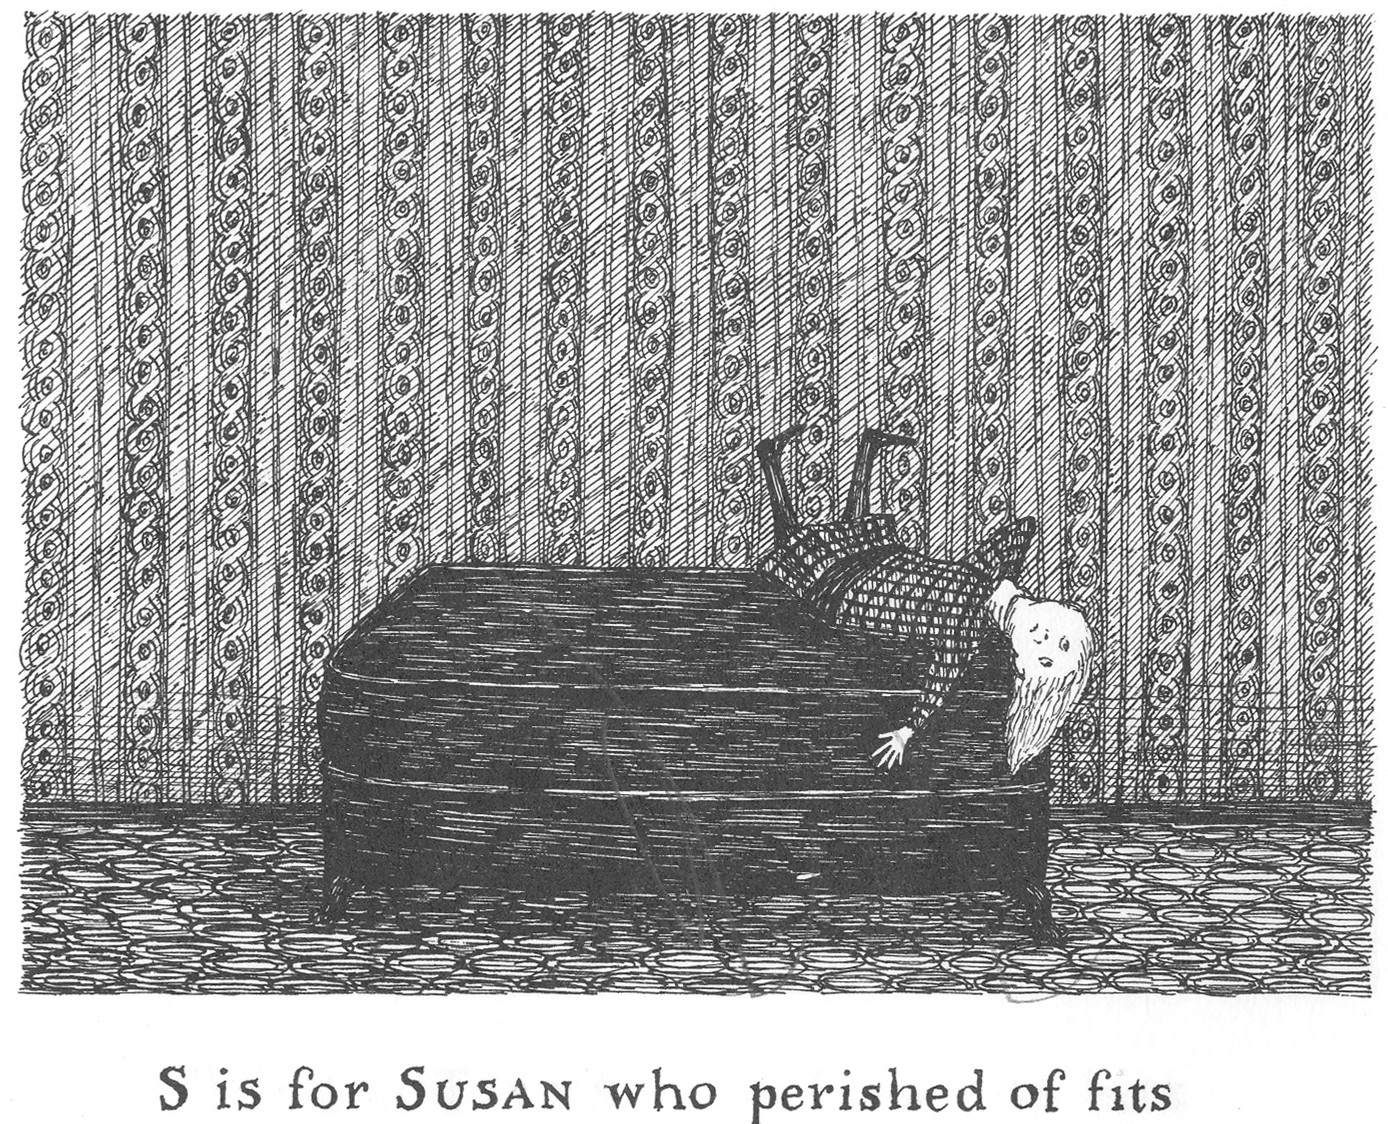 [S+is+for+Susan2.jpg]